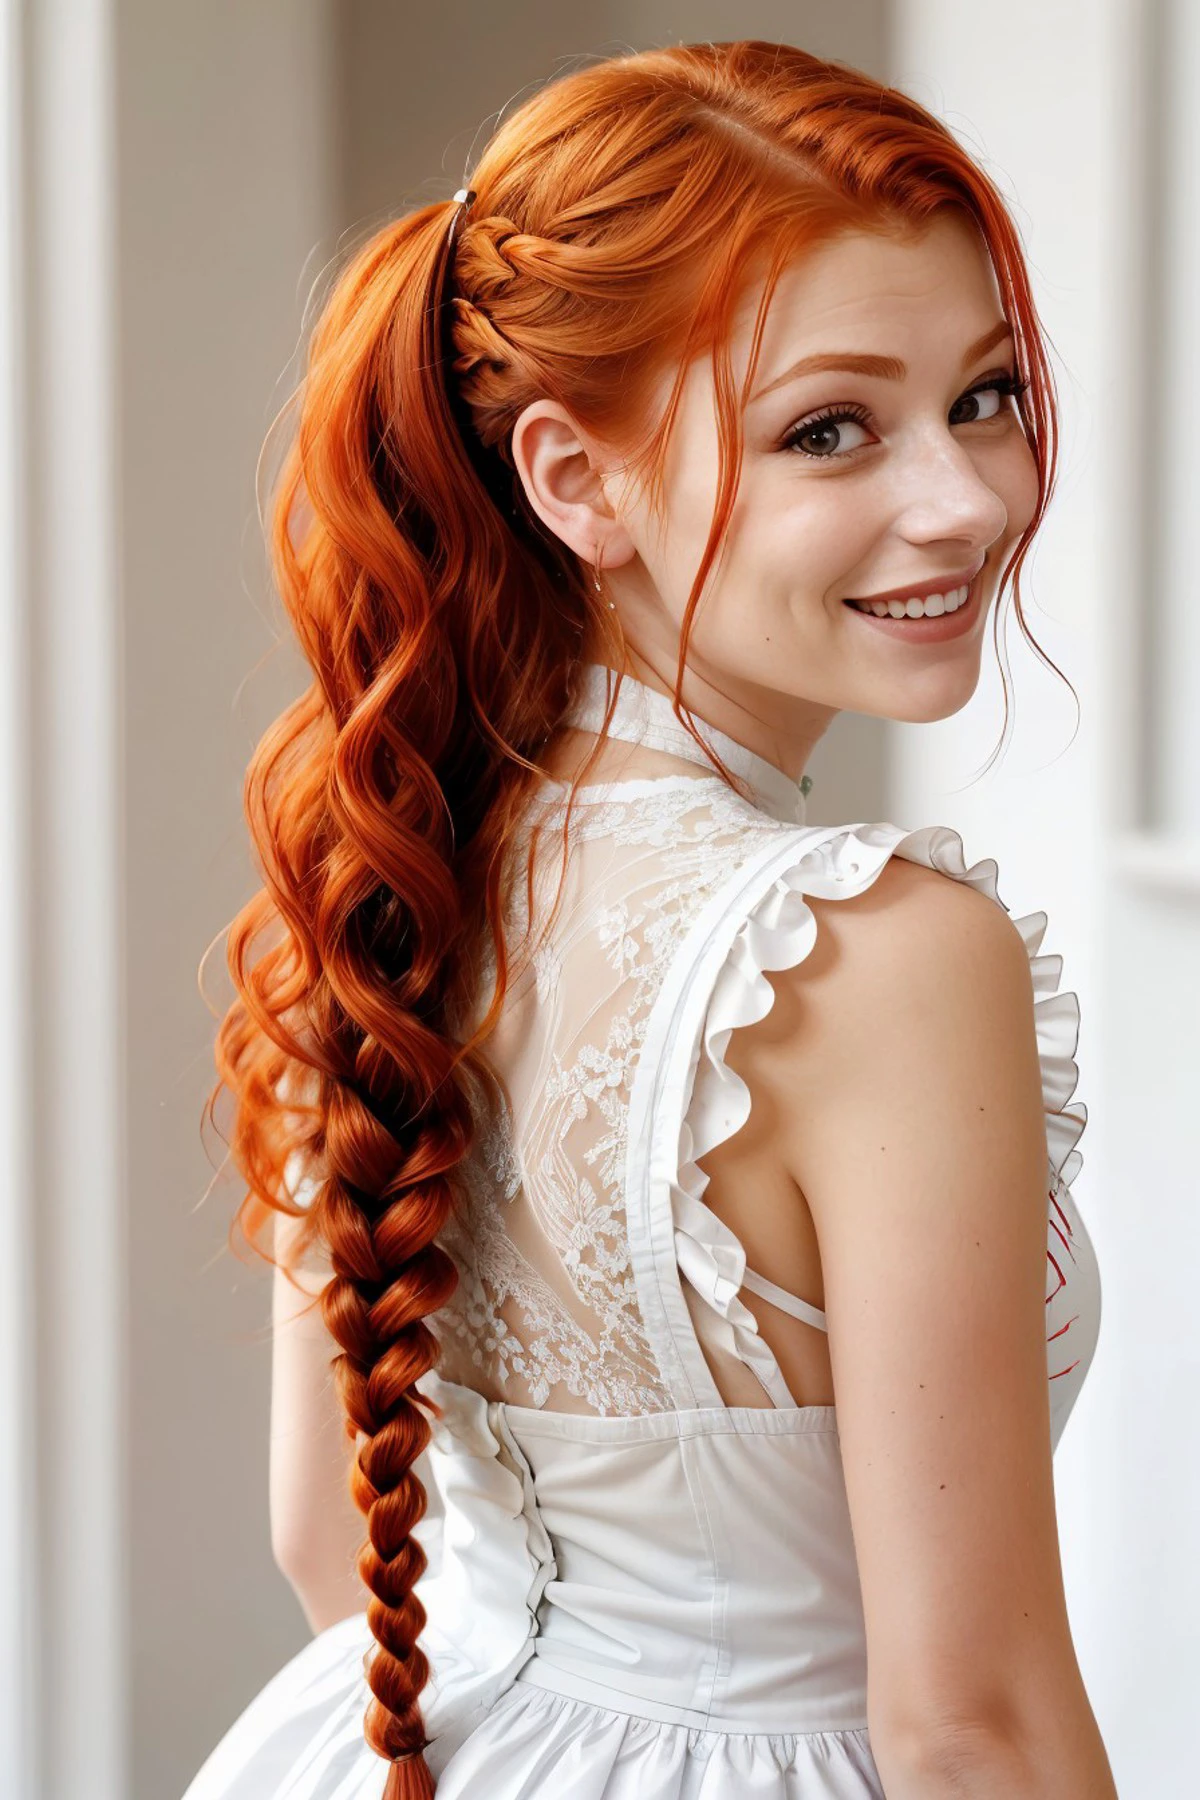 headshot of photo of KaterinaSoria red hair, focus on smiling face, from behind wearing a maid dress her hair is styled as ladder braid,